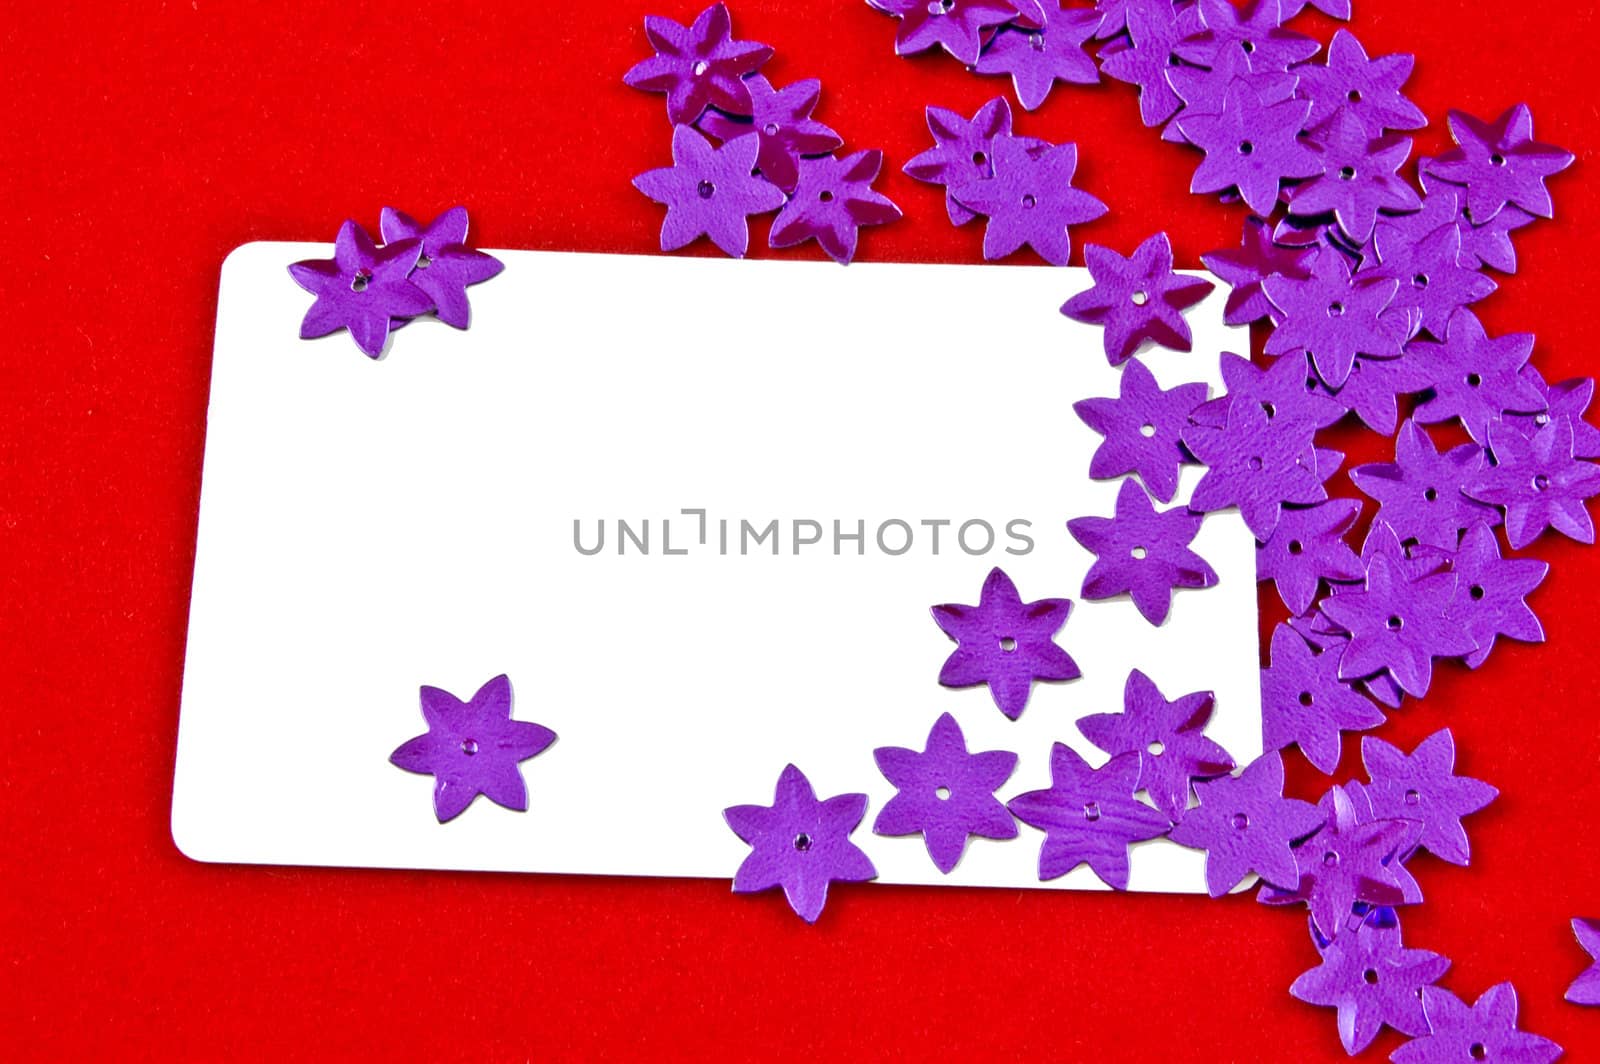 white card and violet stars on red background  by galcka